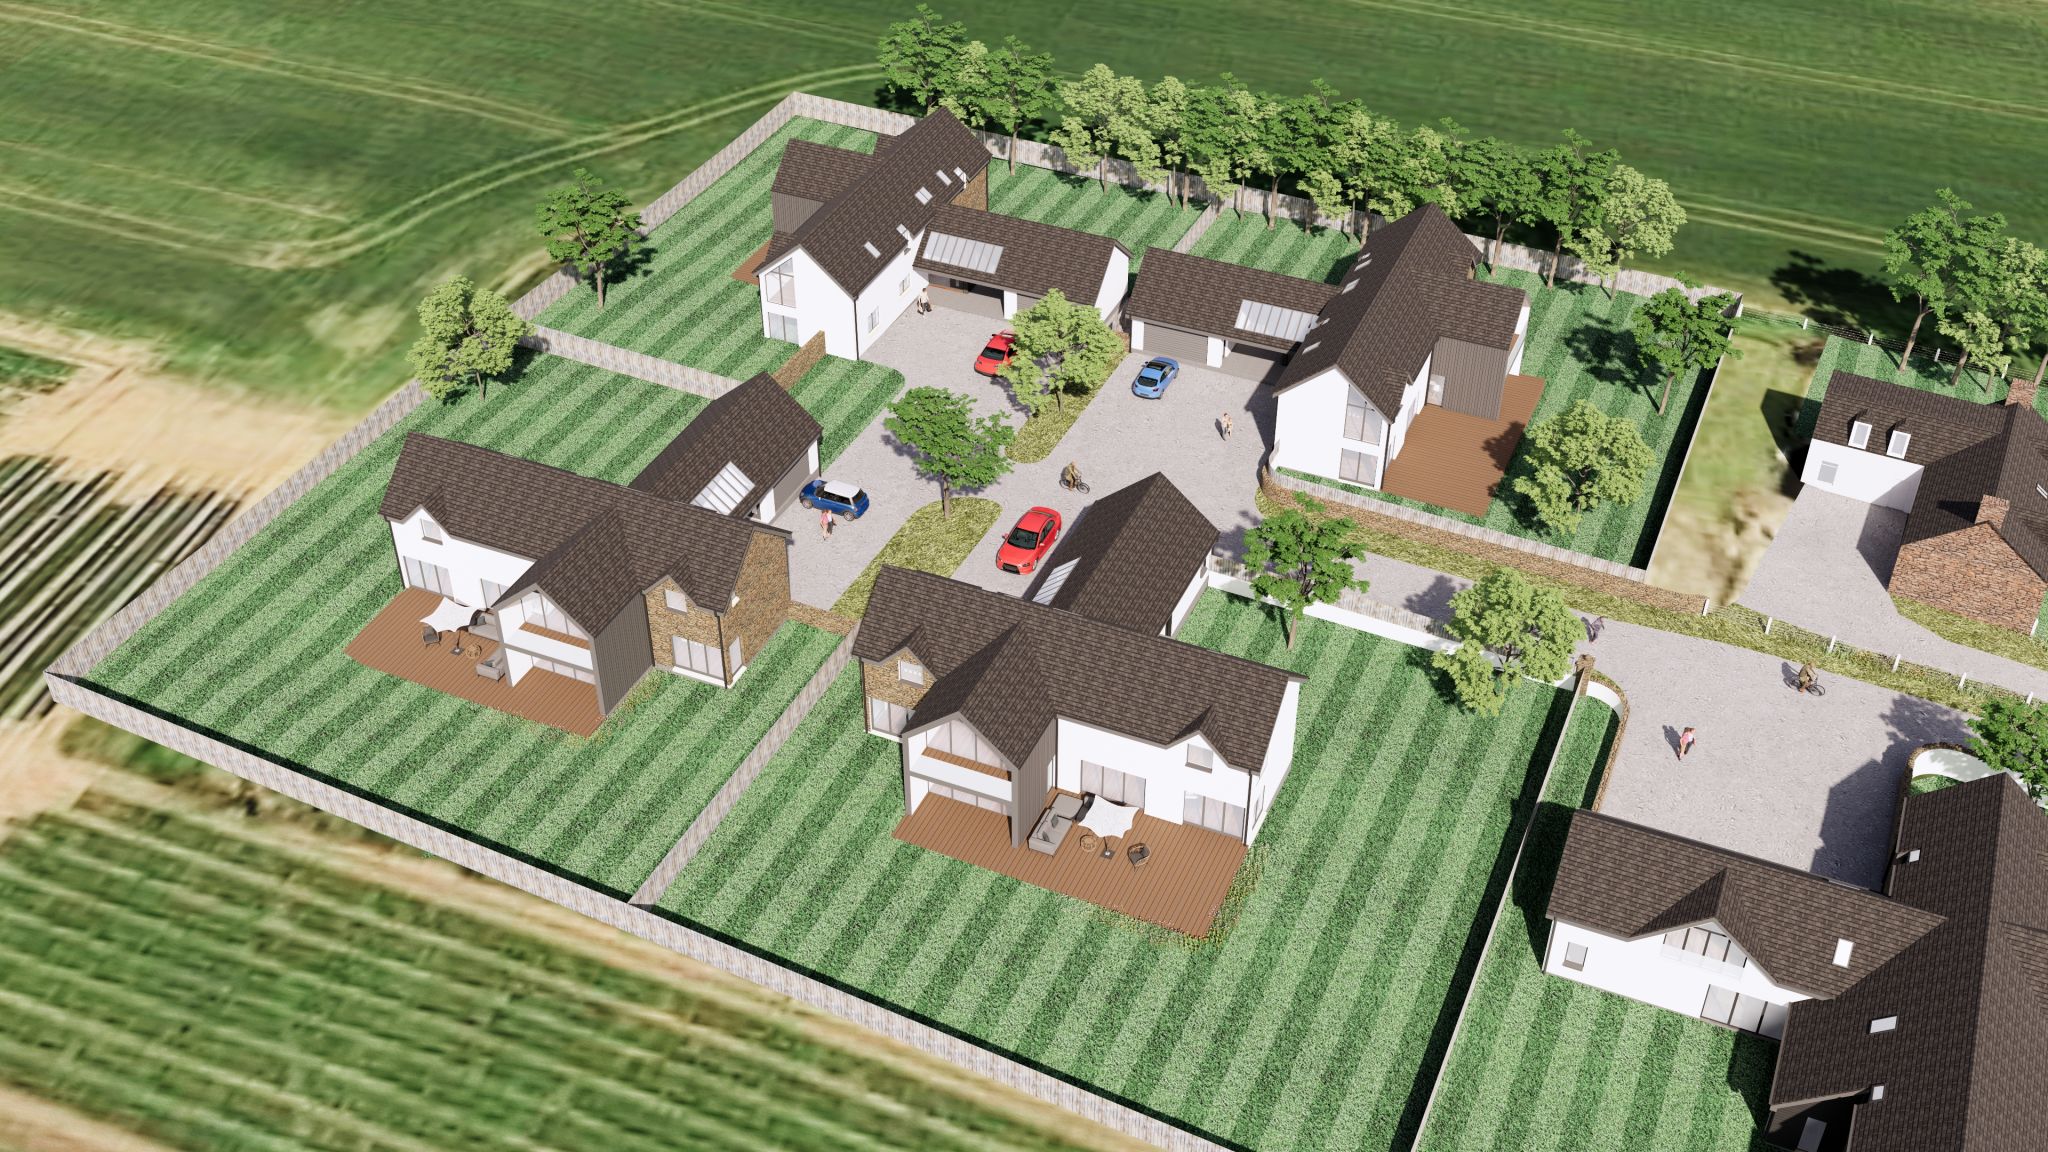 Video: Voigt gains permission for five new homes in Angus